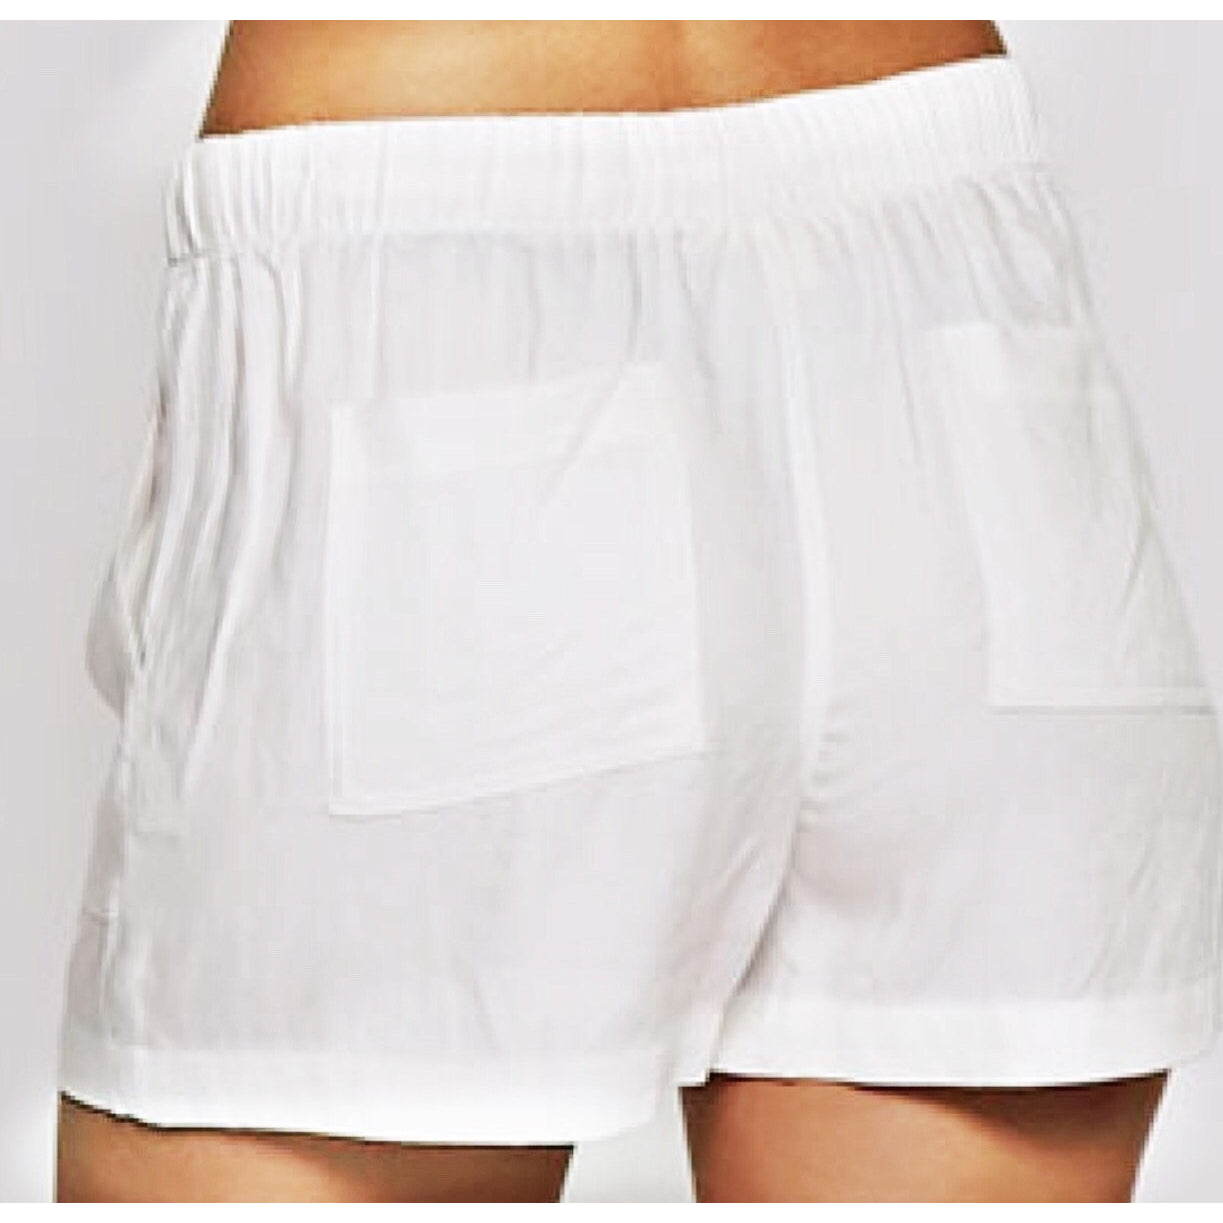 Zahara Shorts in Just A Little Off White by Lovestitch - Glamco Boutique 